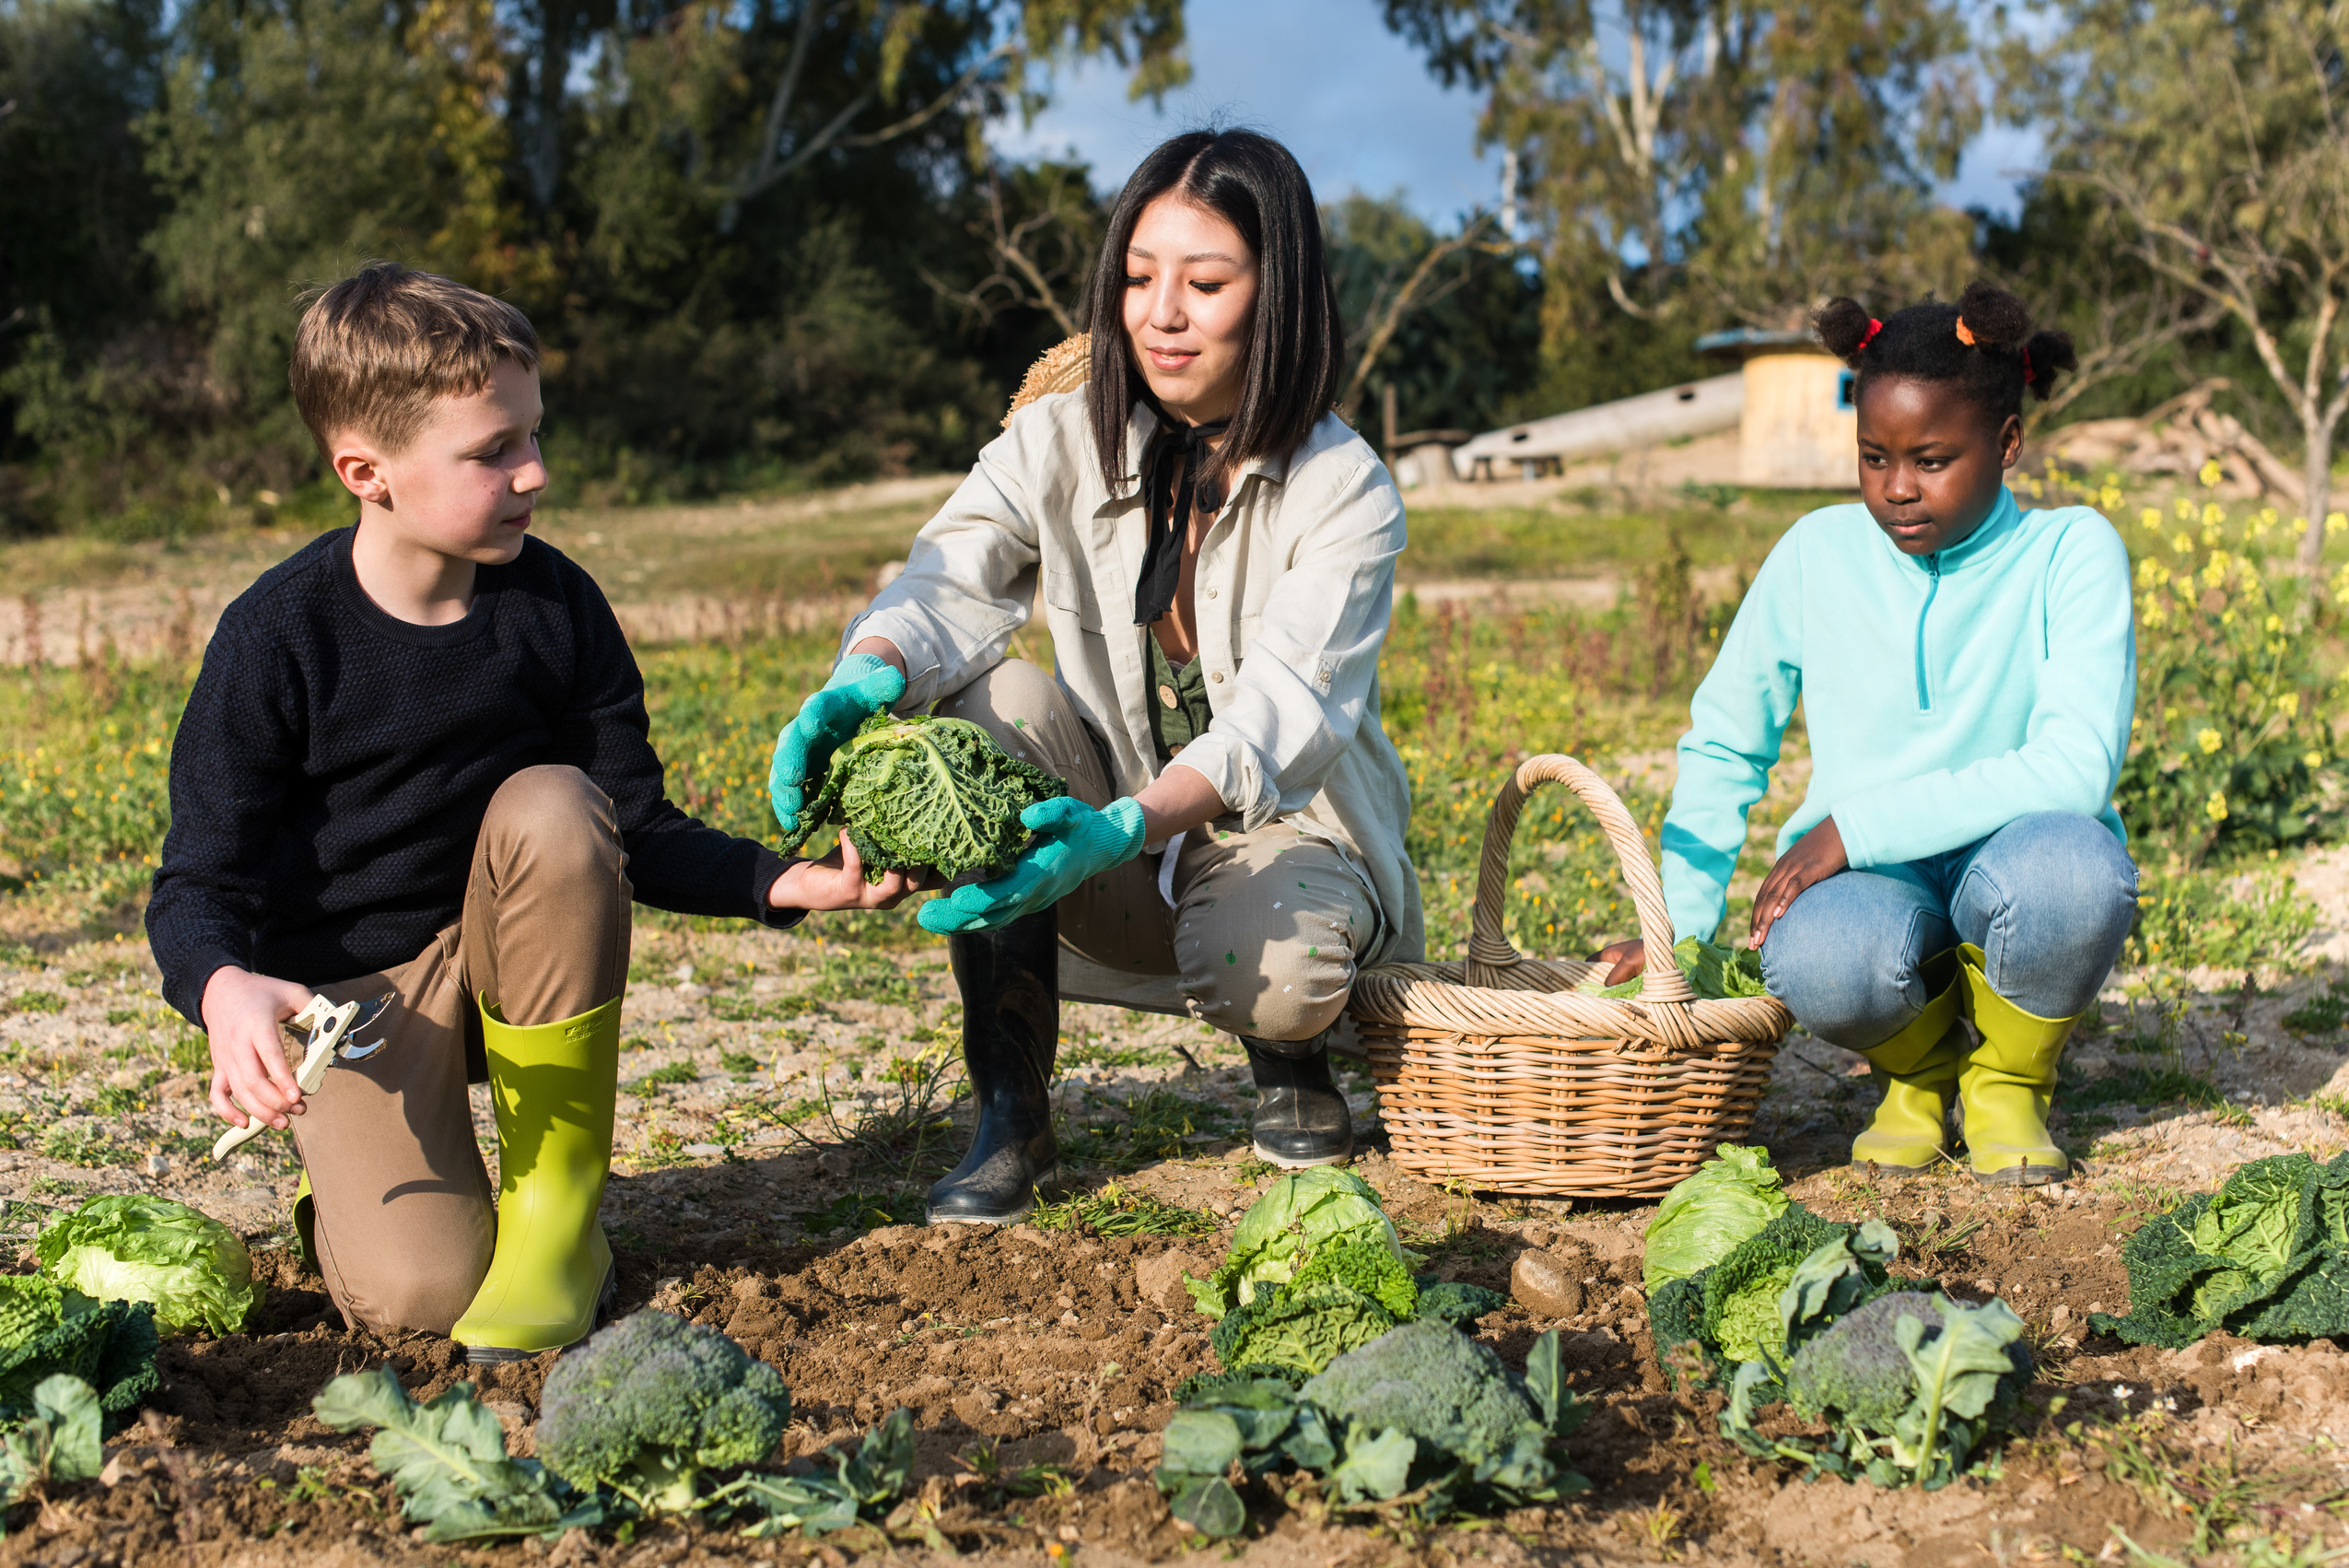 Diverse Kids Helping the Woman Harvest Cabbage in the Garden